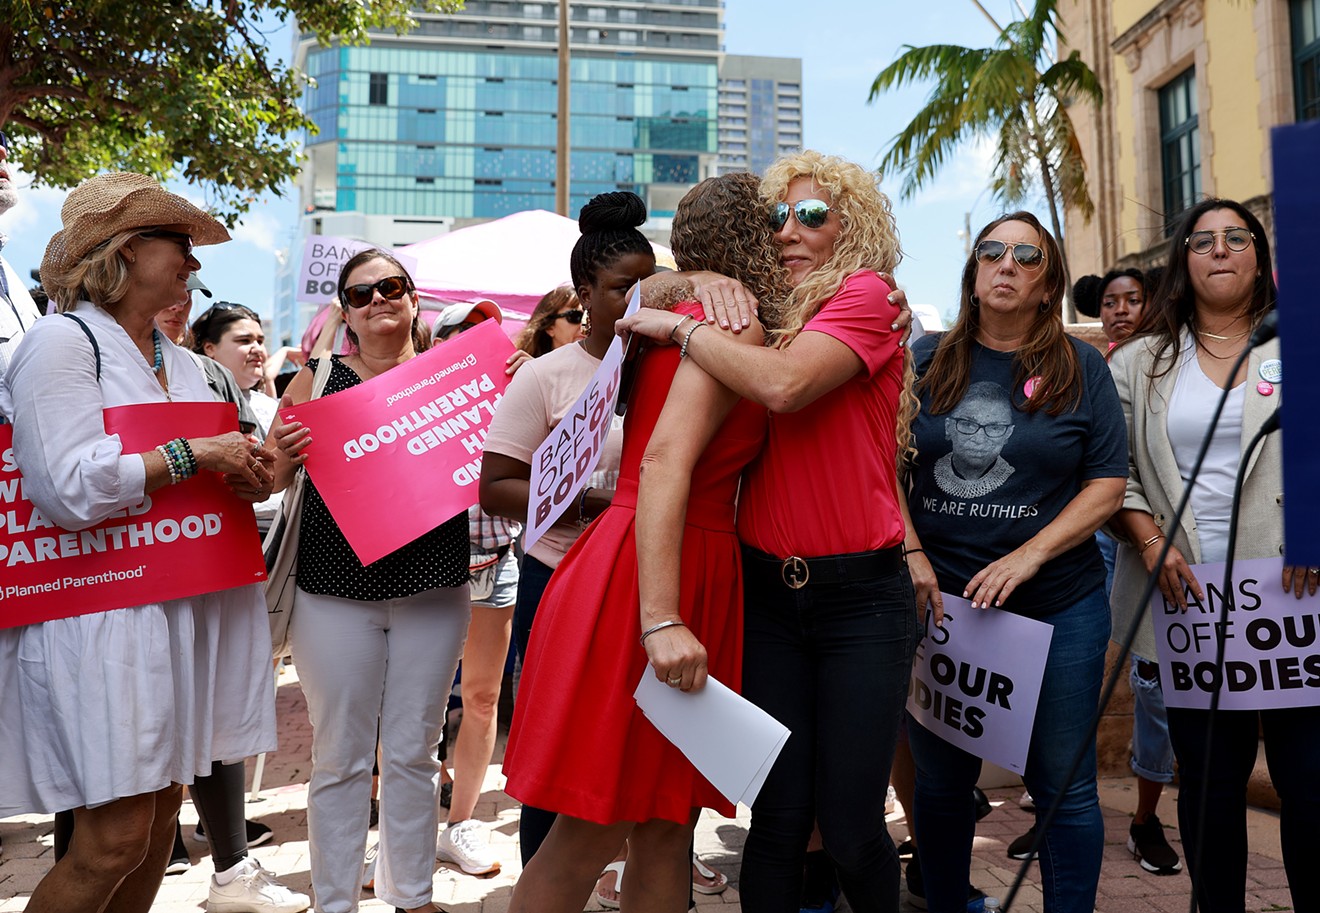 Rachel Friedland (right) hugs U.S. Rep. Debbie Wasserman Schultz on May 3, 2022, at a rally supporting guaranteed federal abortion rights.